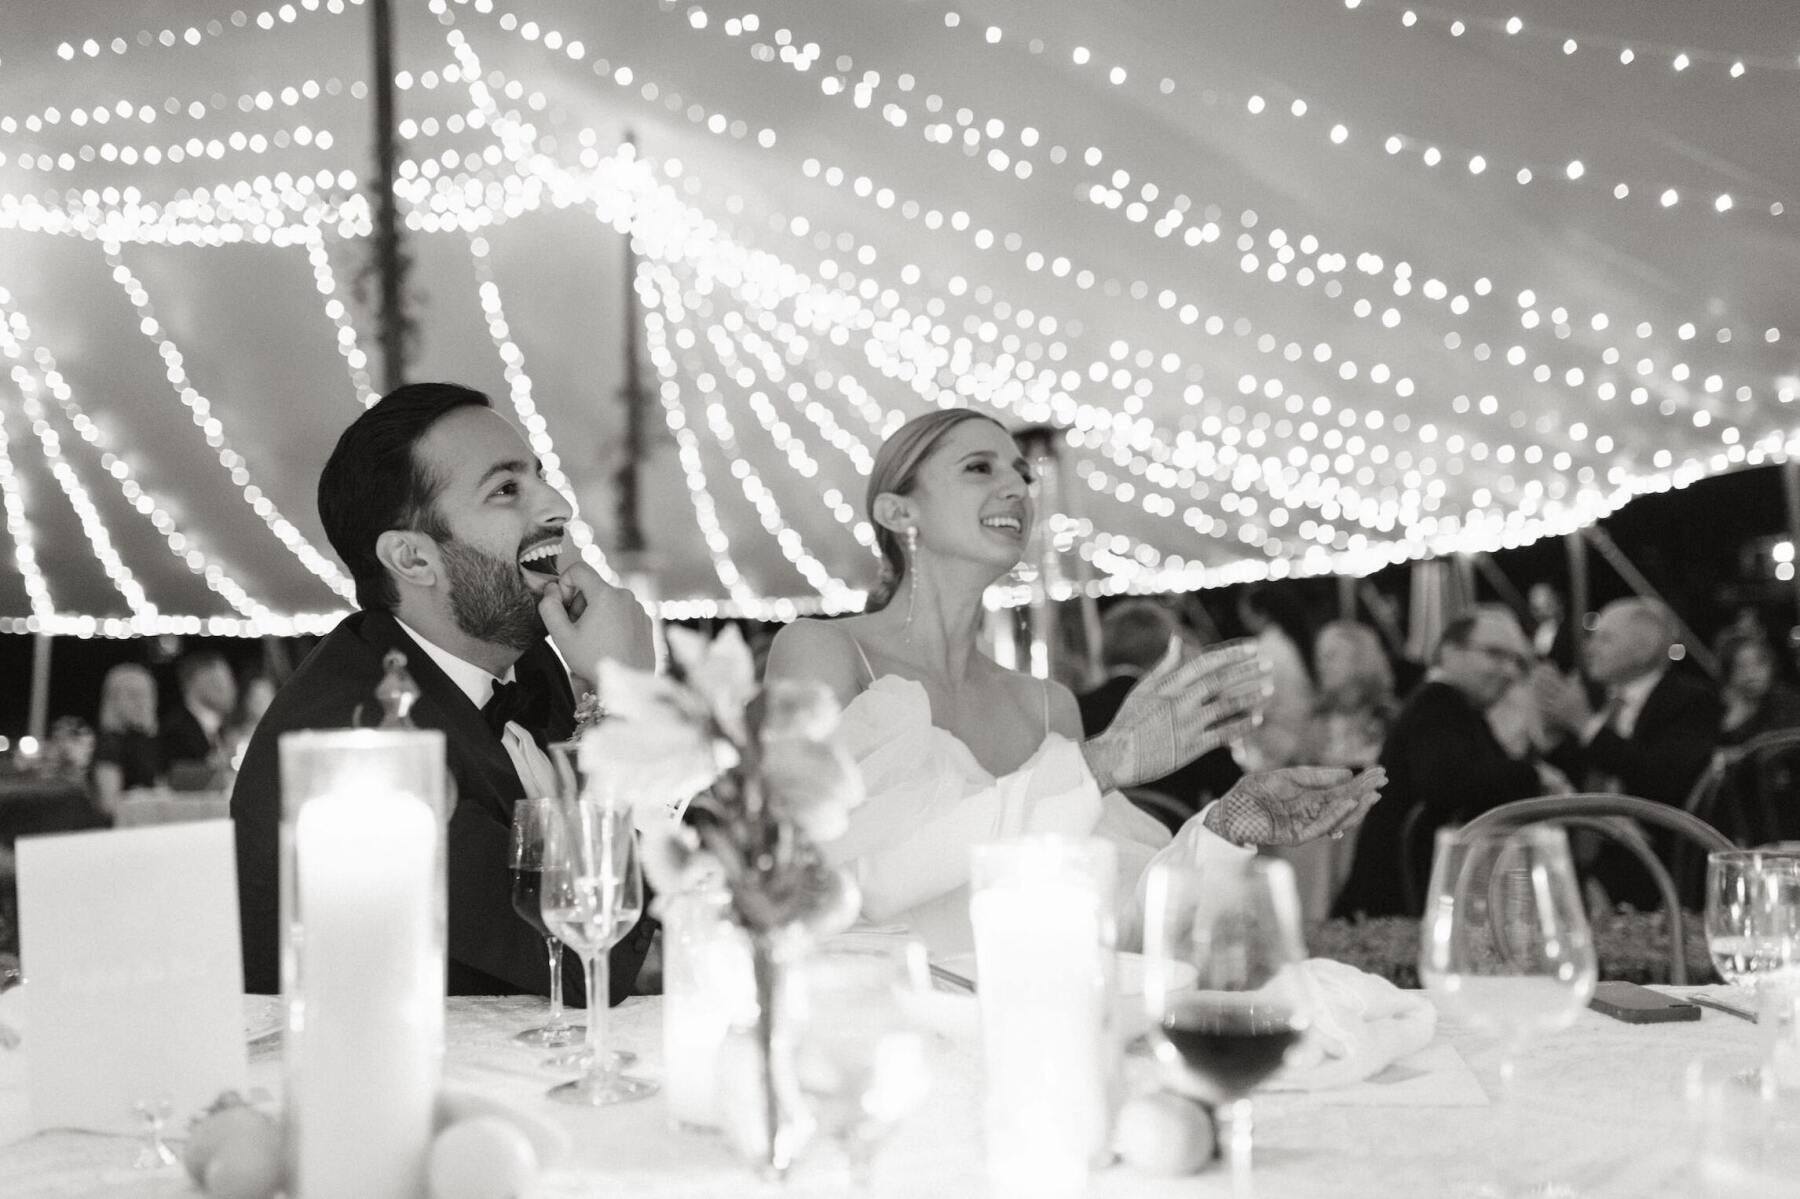 A groom and bride laugh during their Indian fusion wedding reception which took place in a tent with lights strung overhead.